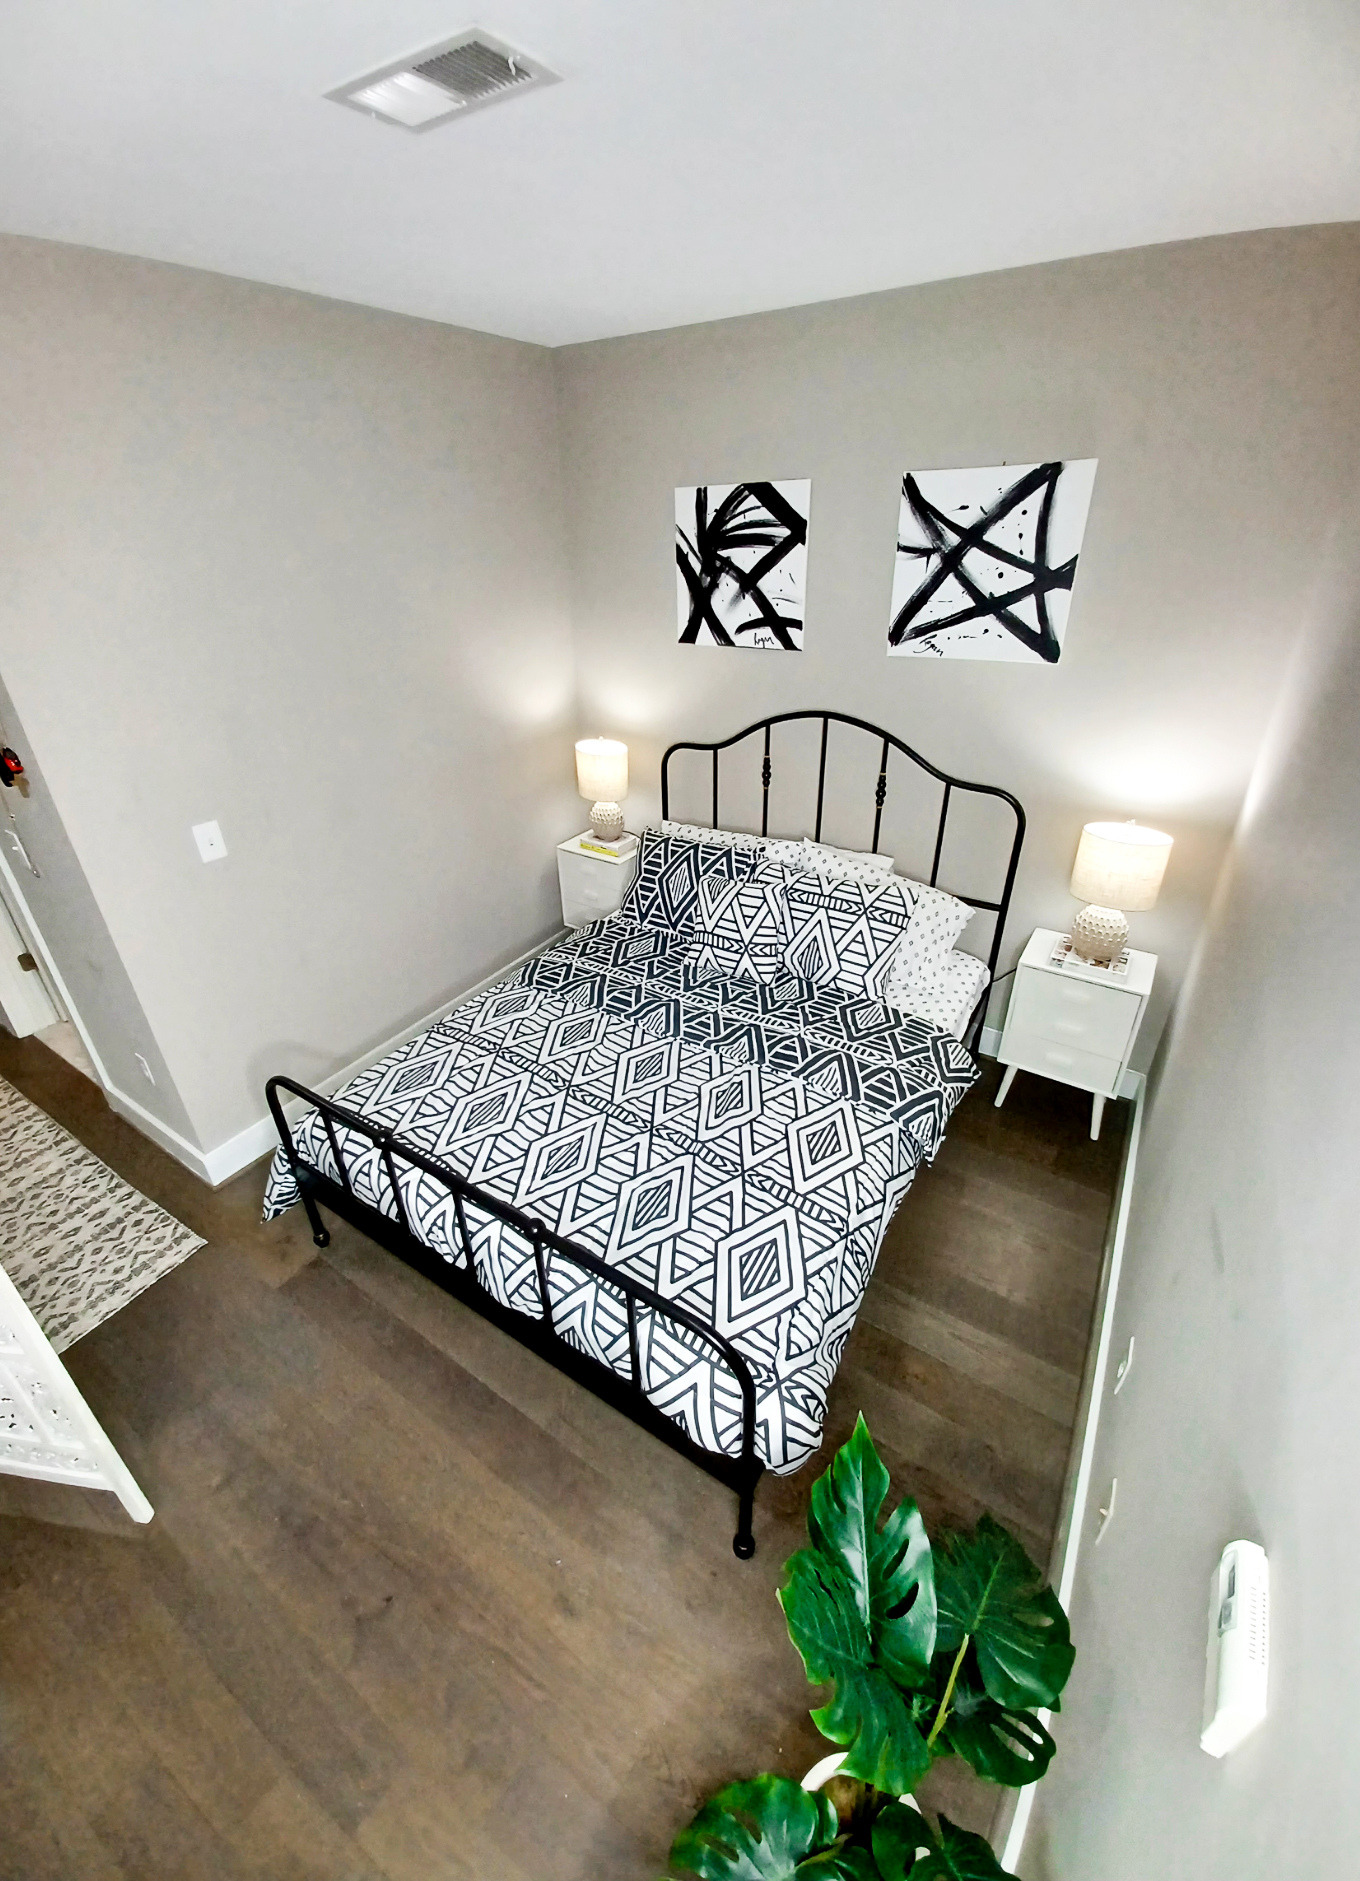 Black and white themed bedroom